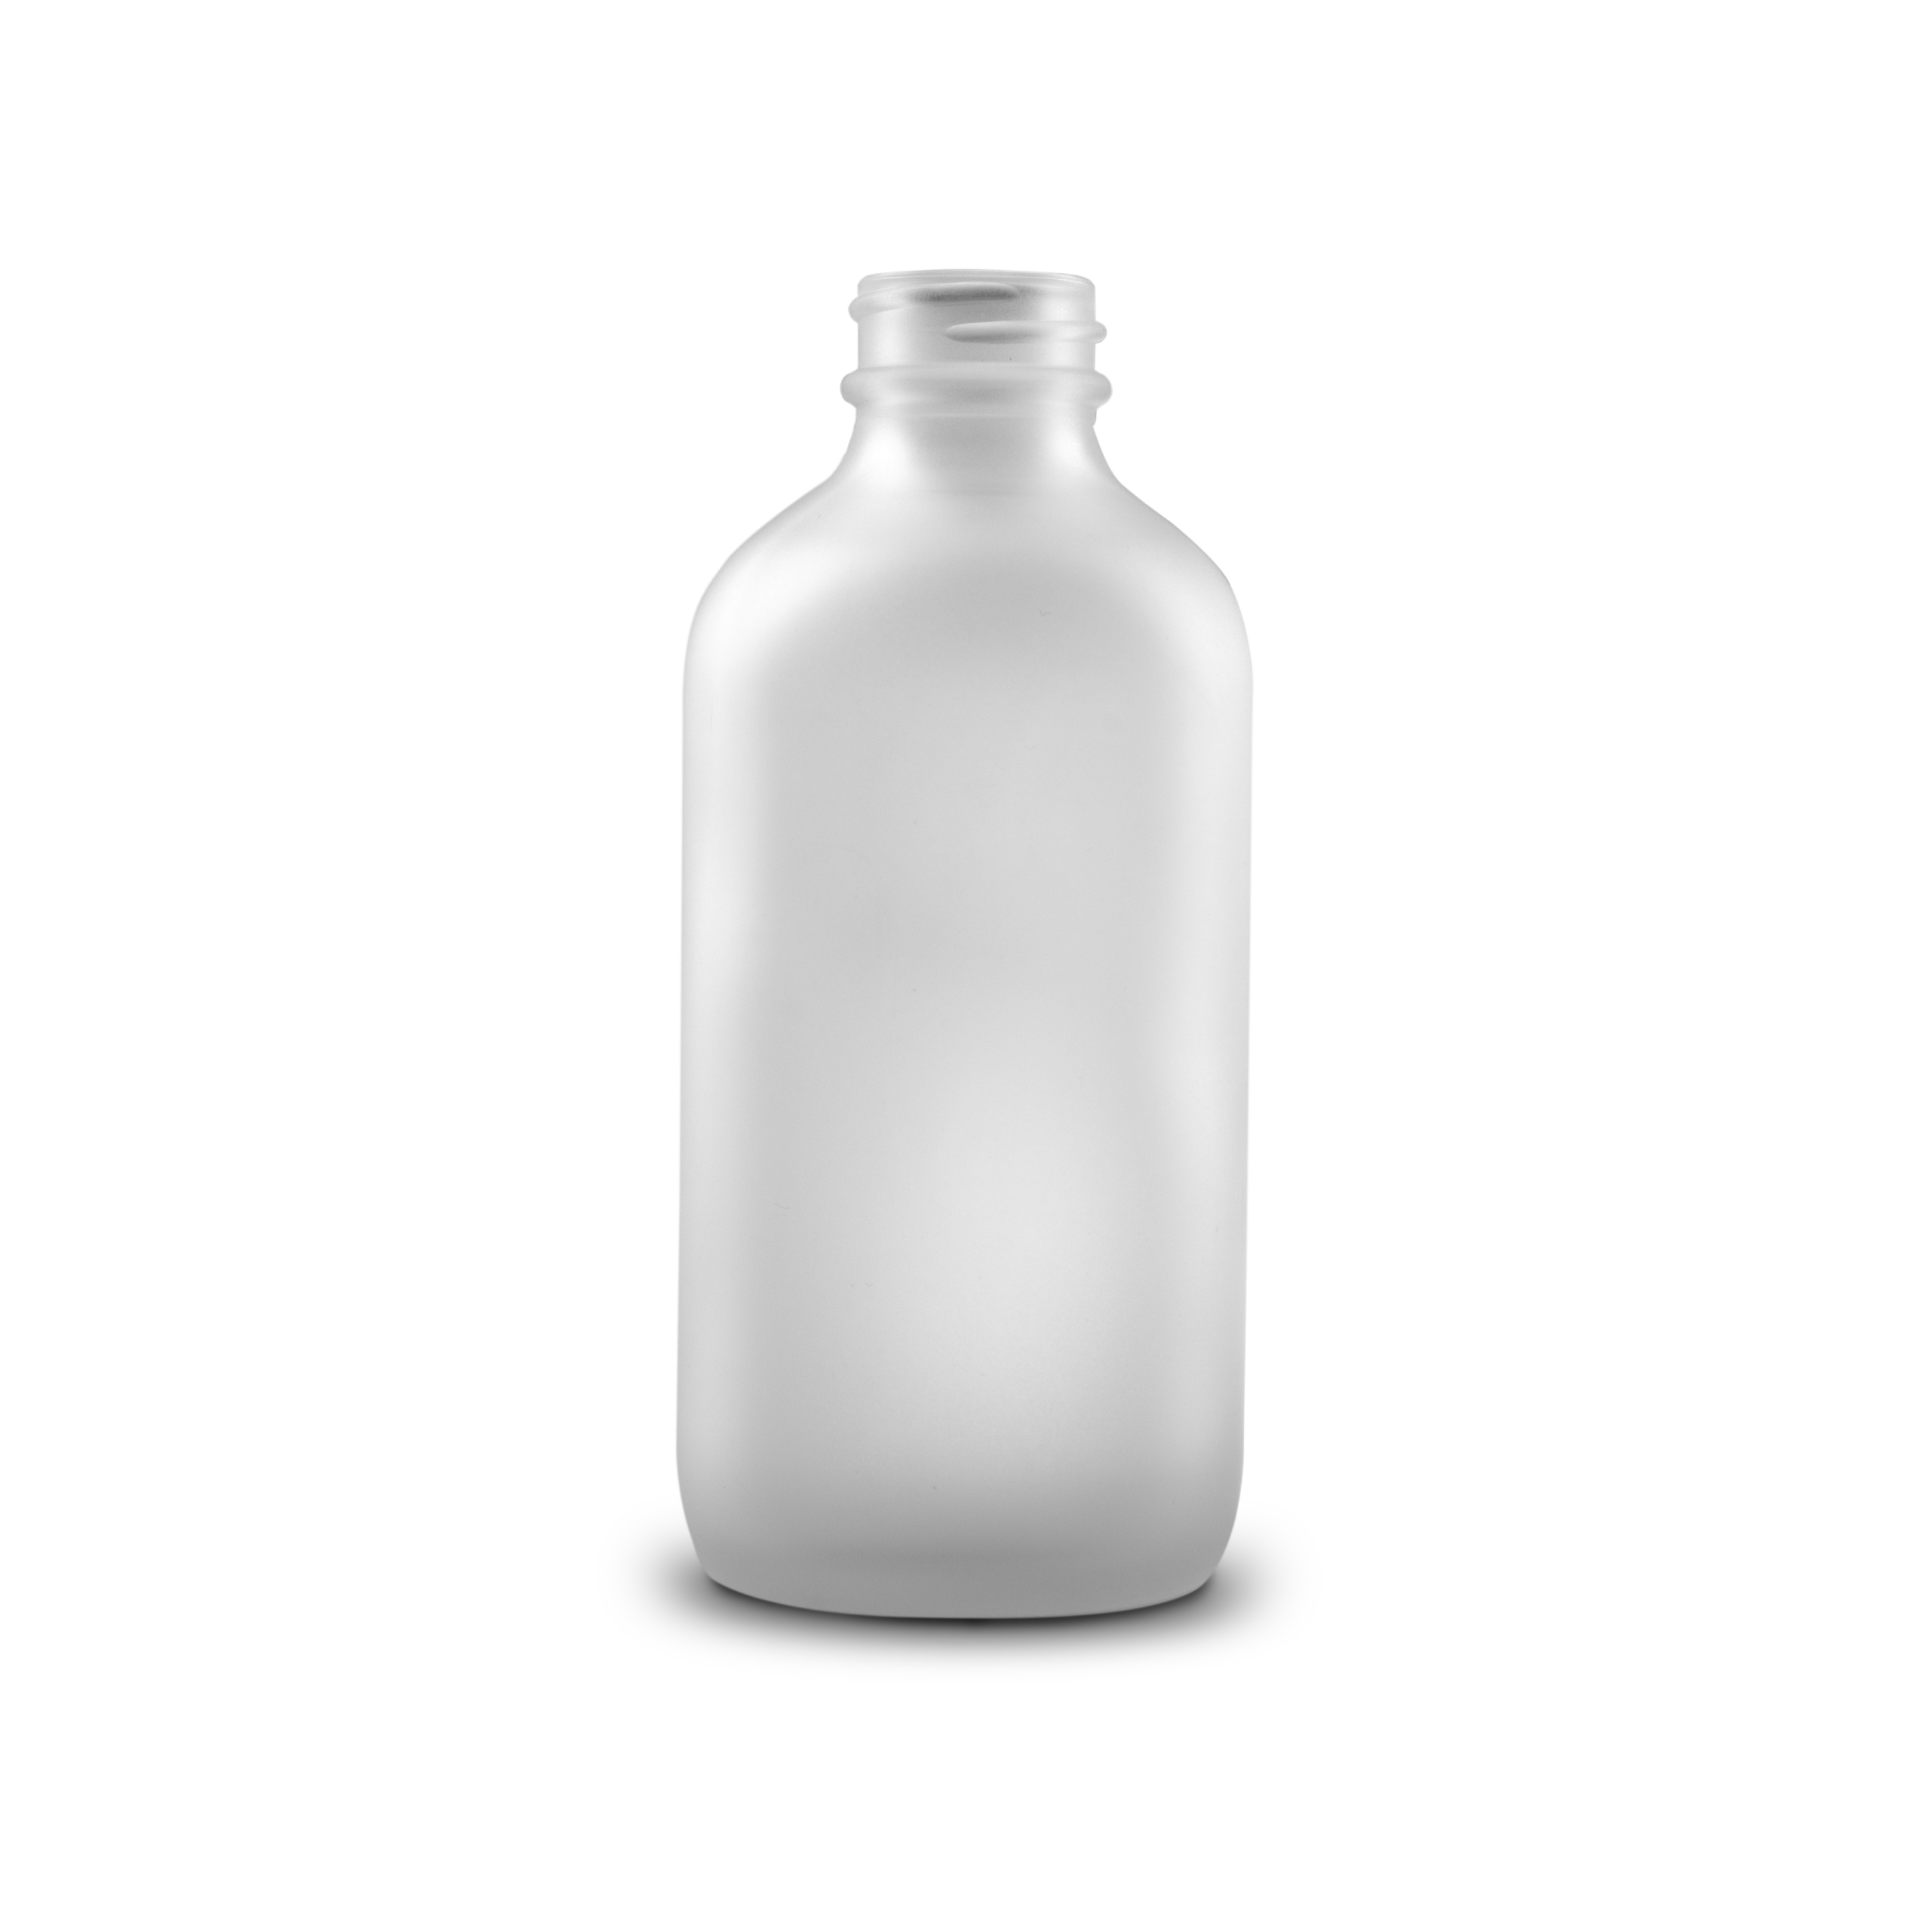 8 oz clear frosted glass bottles can be used for storing anything from condiments and sauces to homemade pancake syrup.